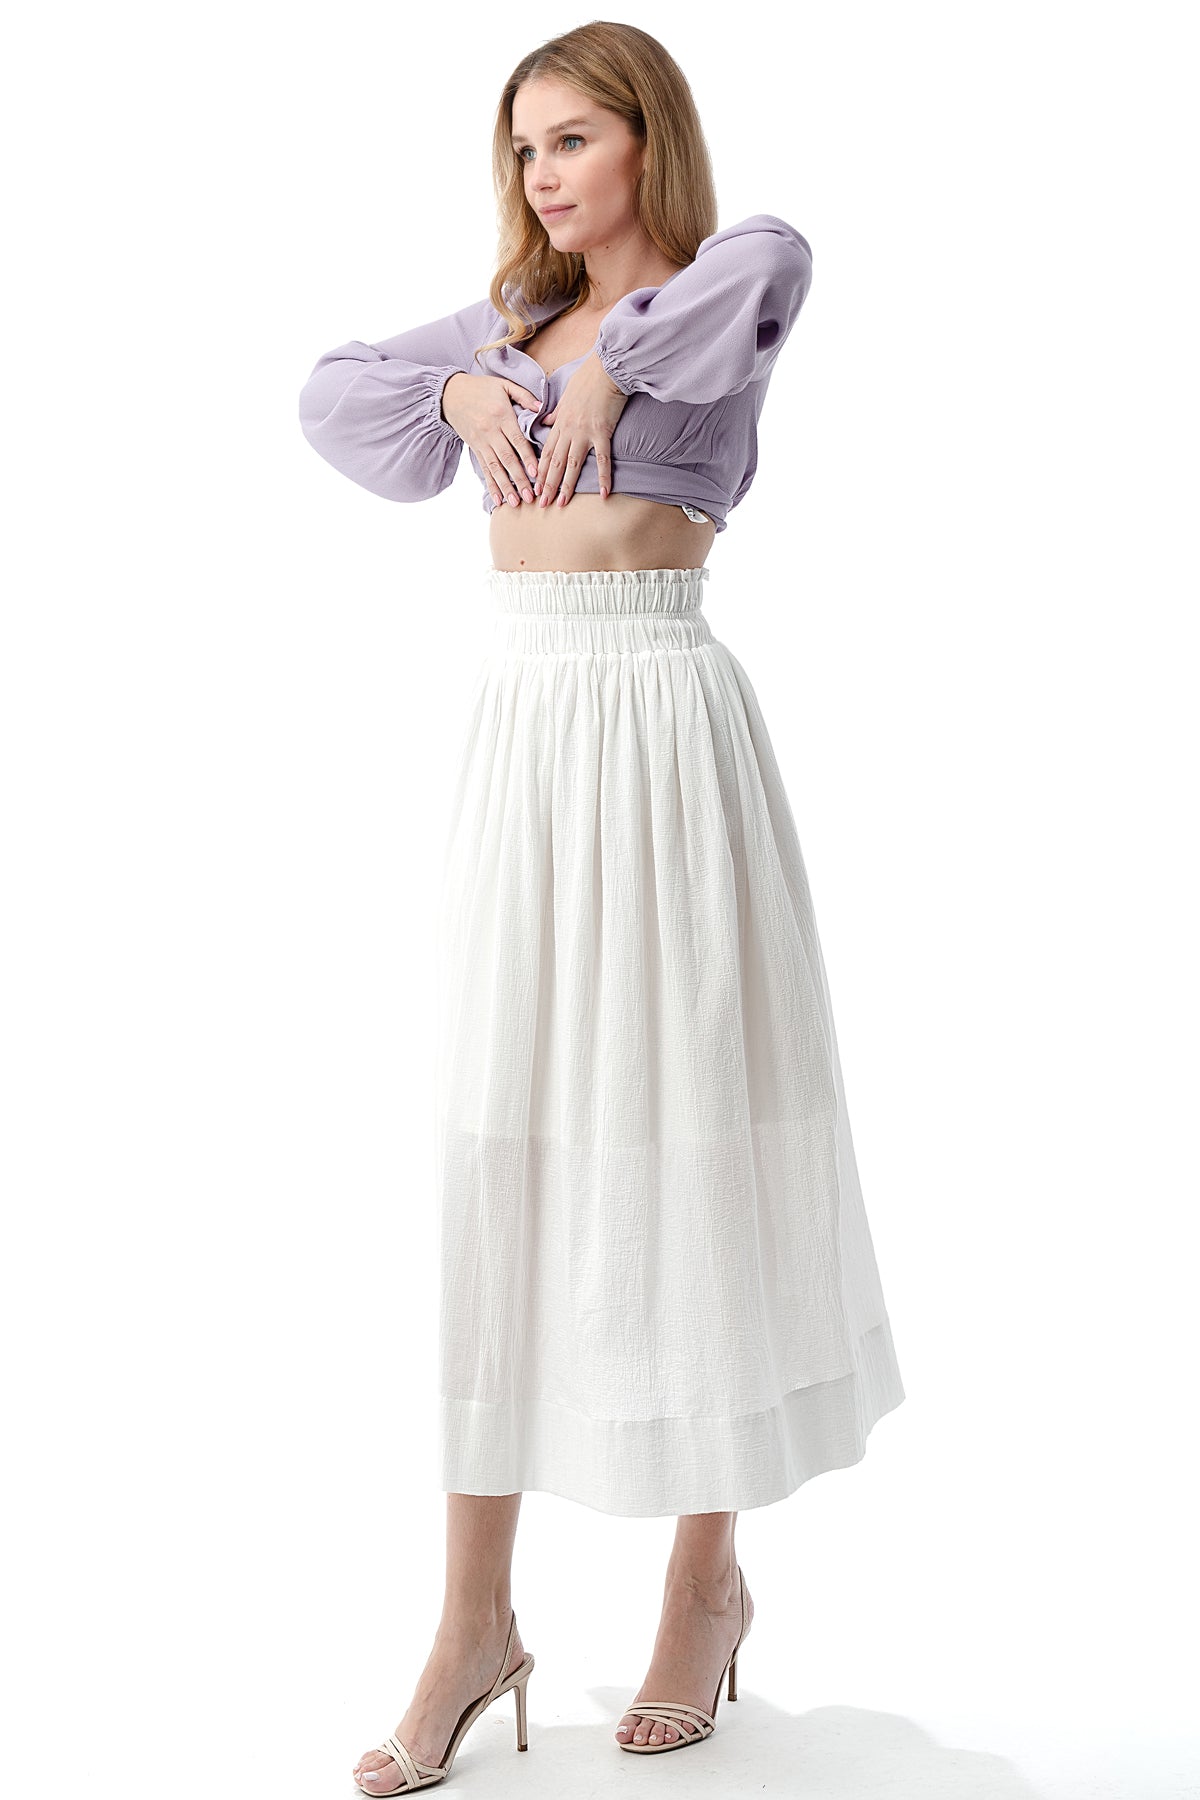 EDGY Land Girl's and Women's High Waist Solid Smocked Mid Maxi Flowy Skirt